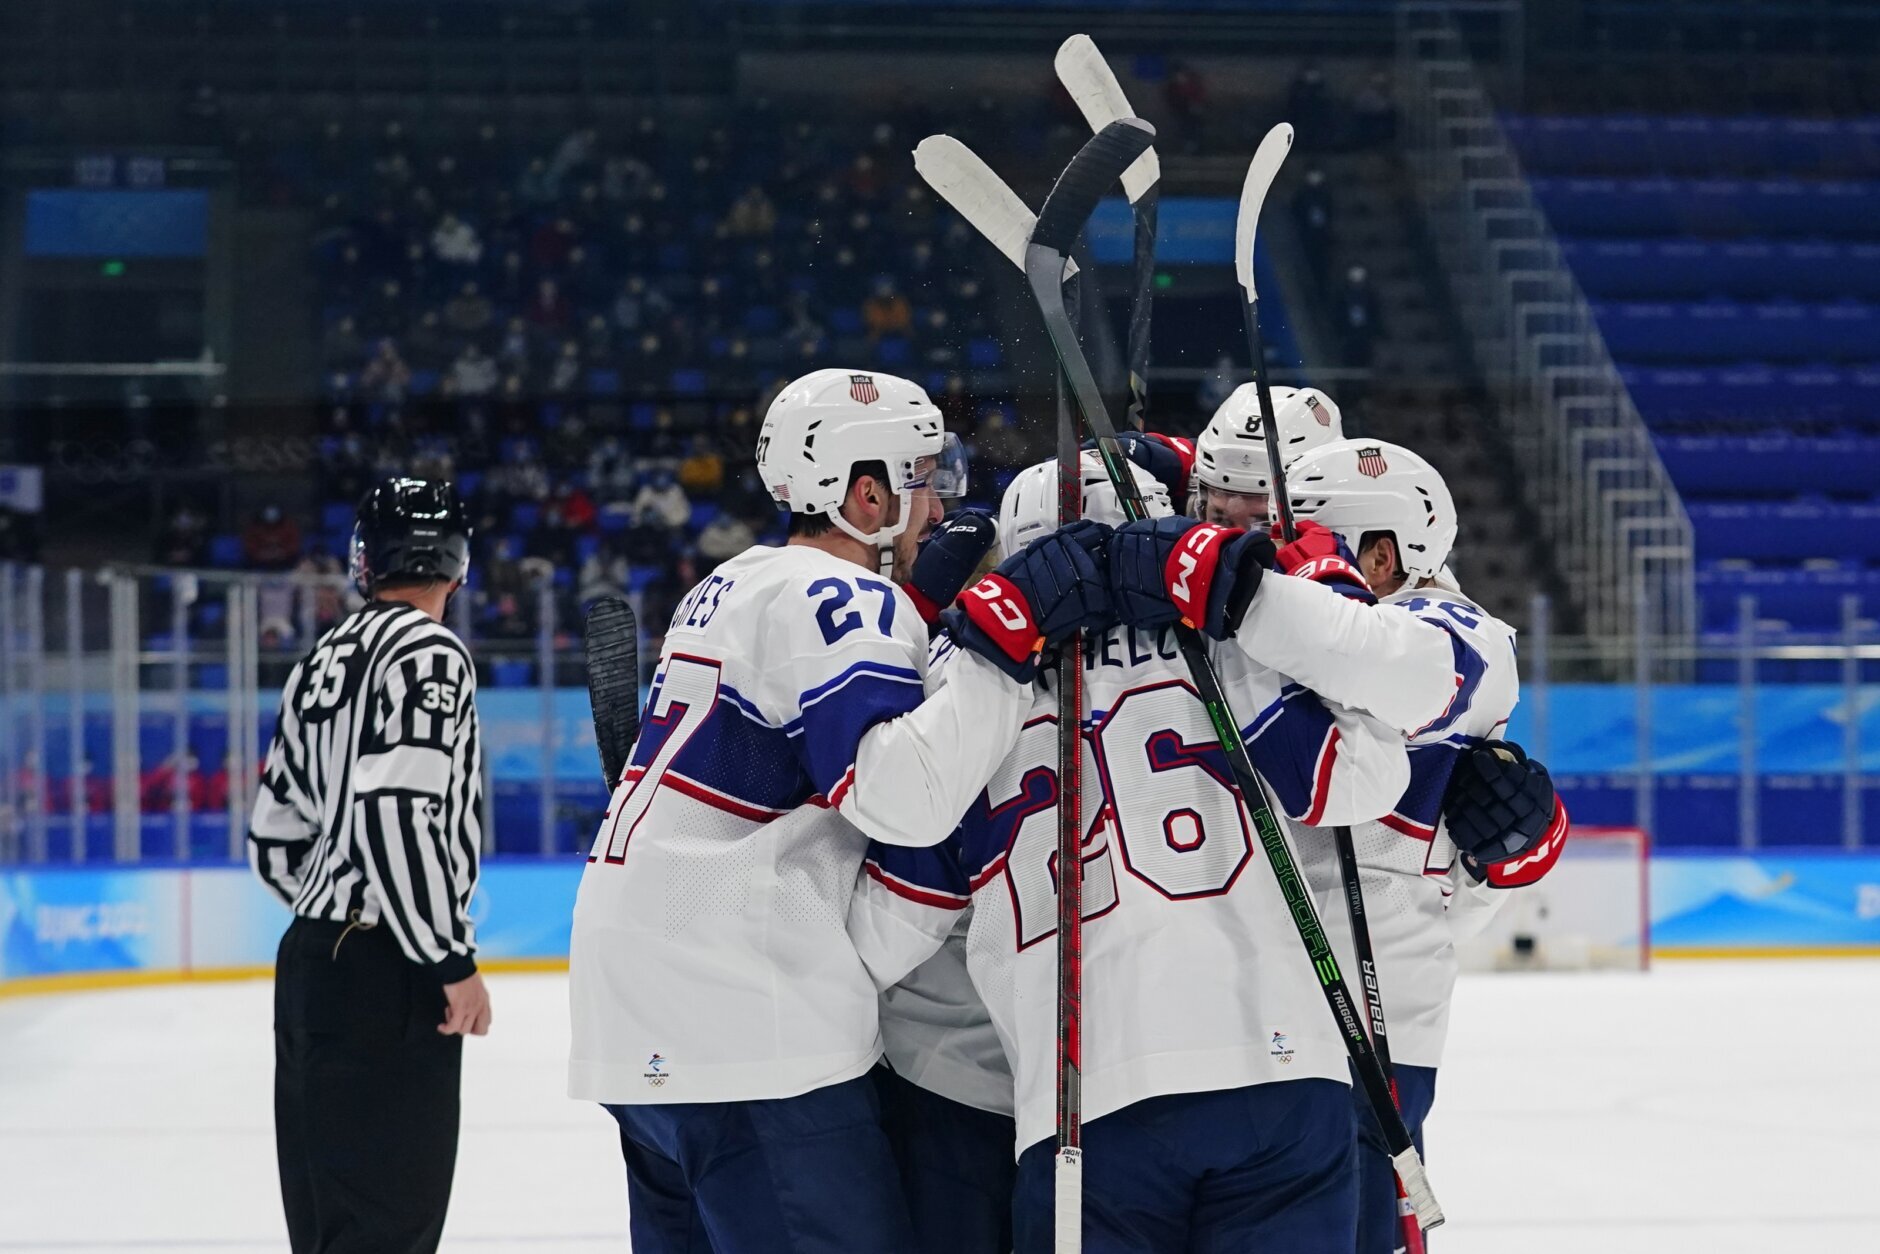 US men's ice hockey team beats Canada at the Olympics for first